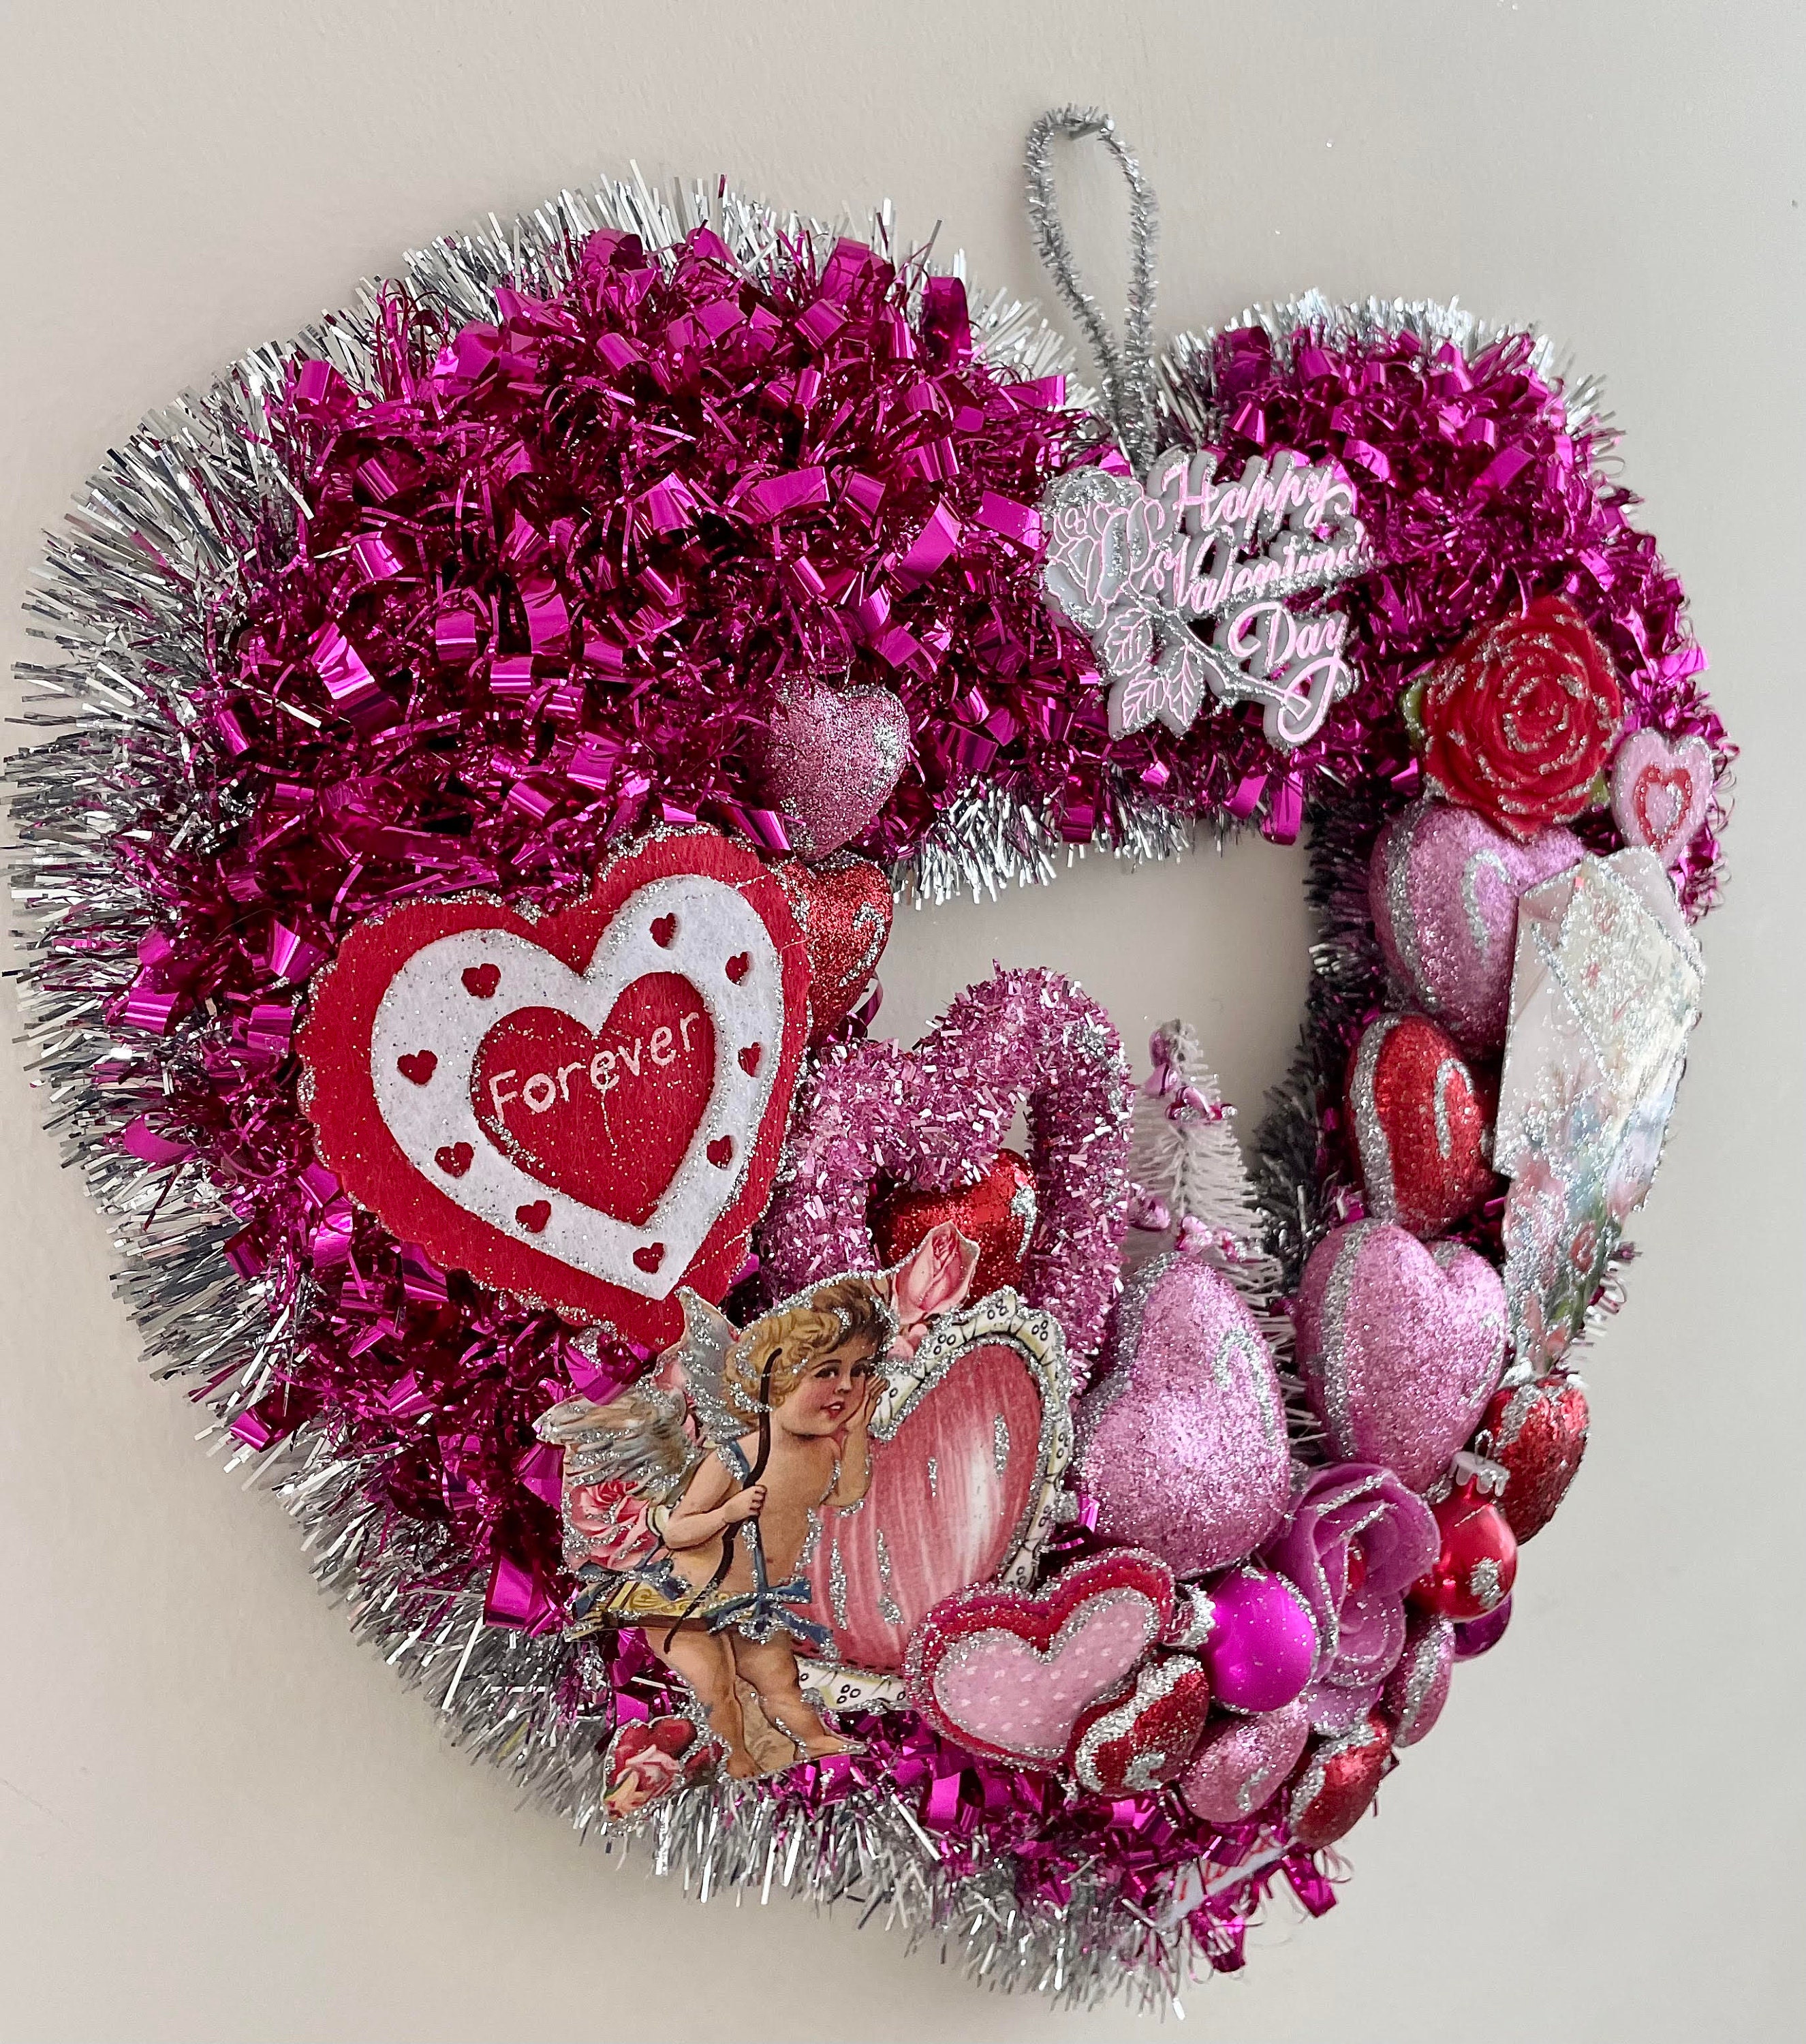 VioletEverGarden Valentine's Day Wreath,15” Heart Shaped Wreath with Red  Berries for Valentine's Day Wedding Festival Decor